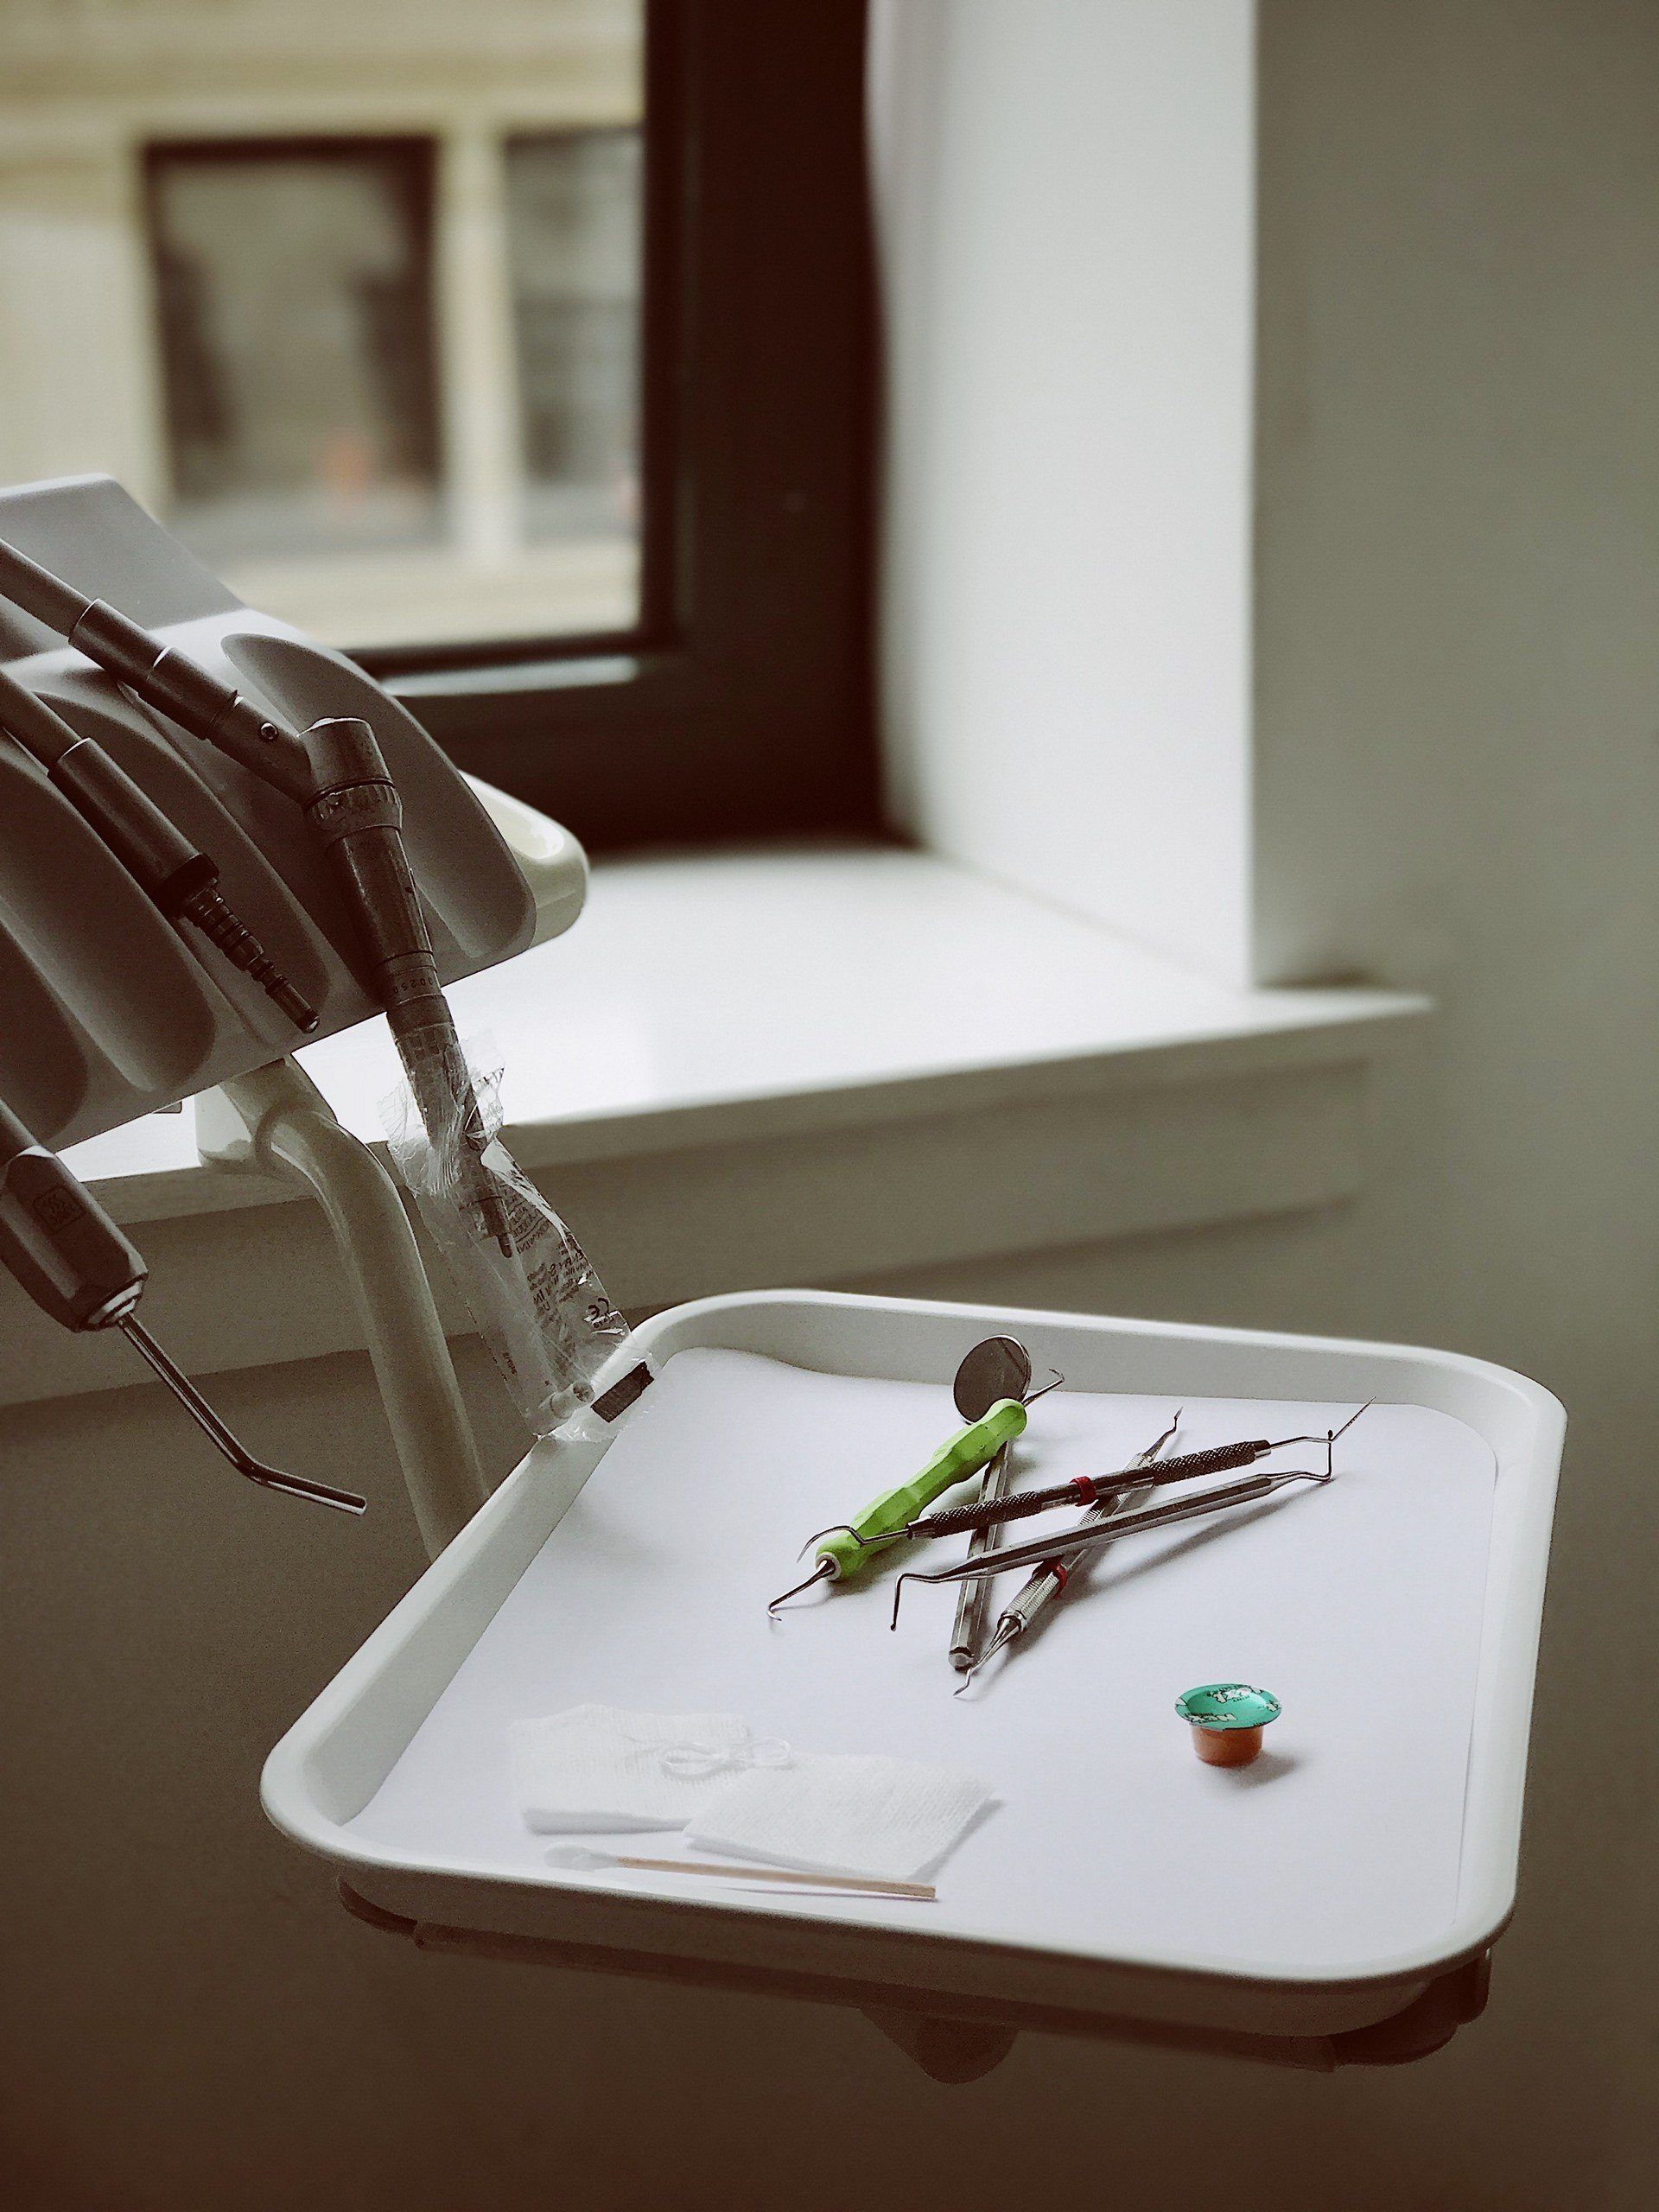 Best NYC dentist office cleaners.